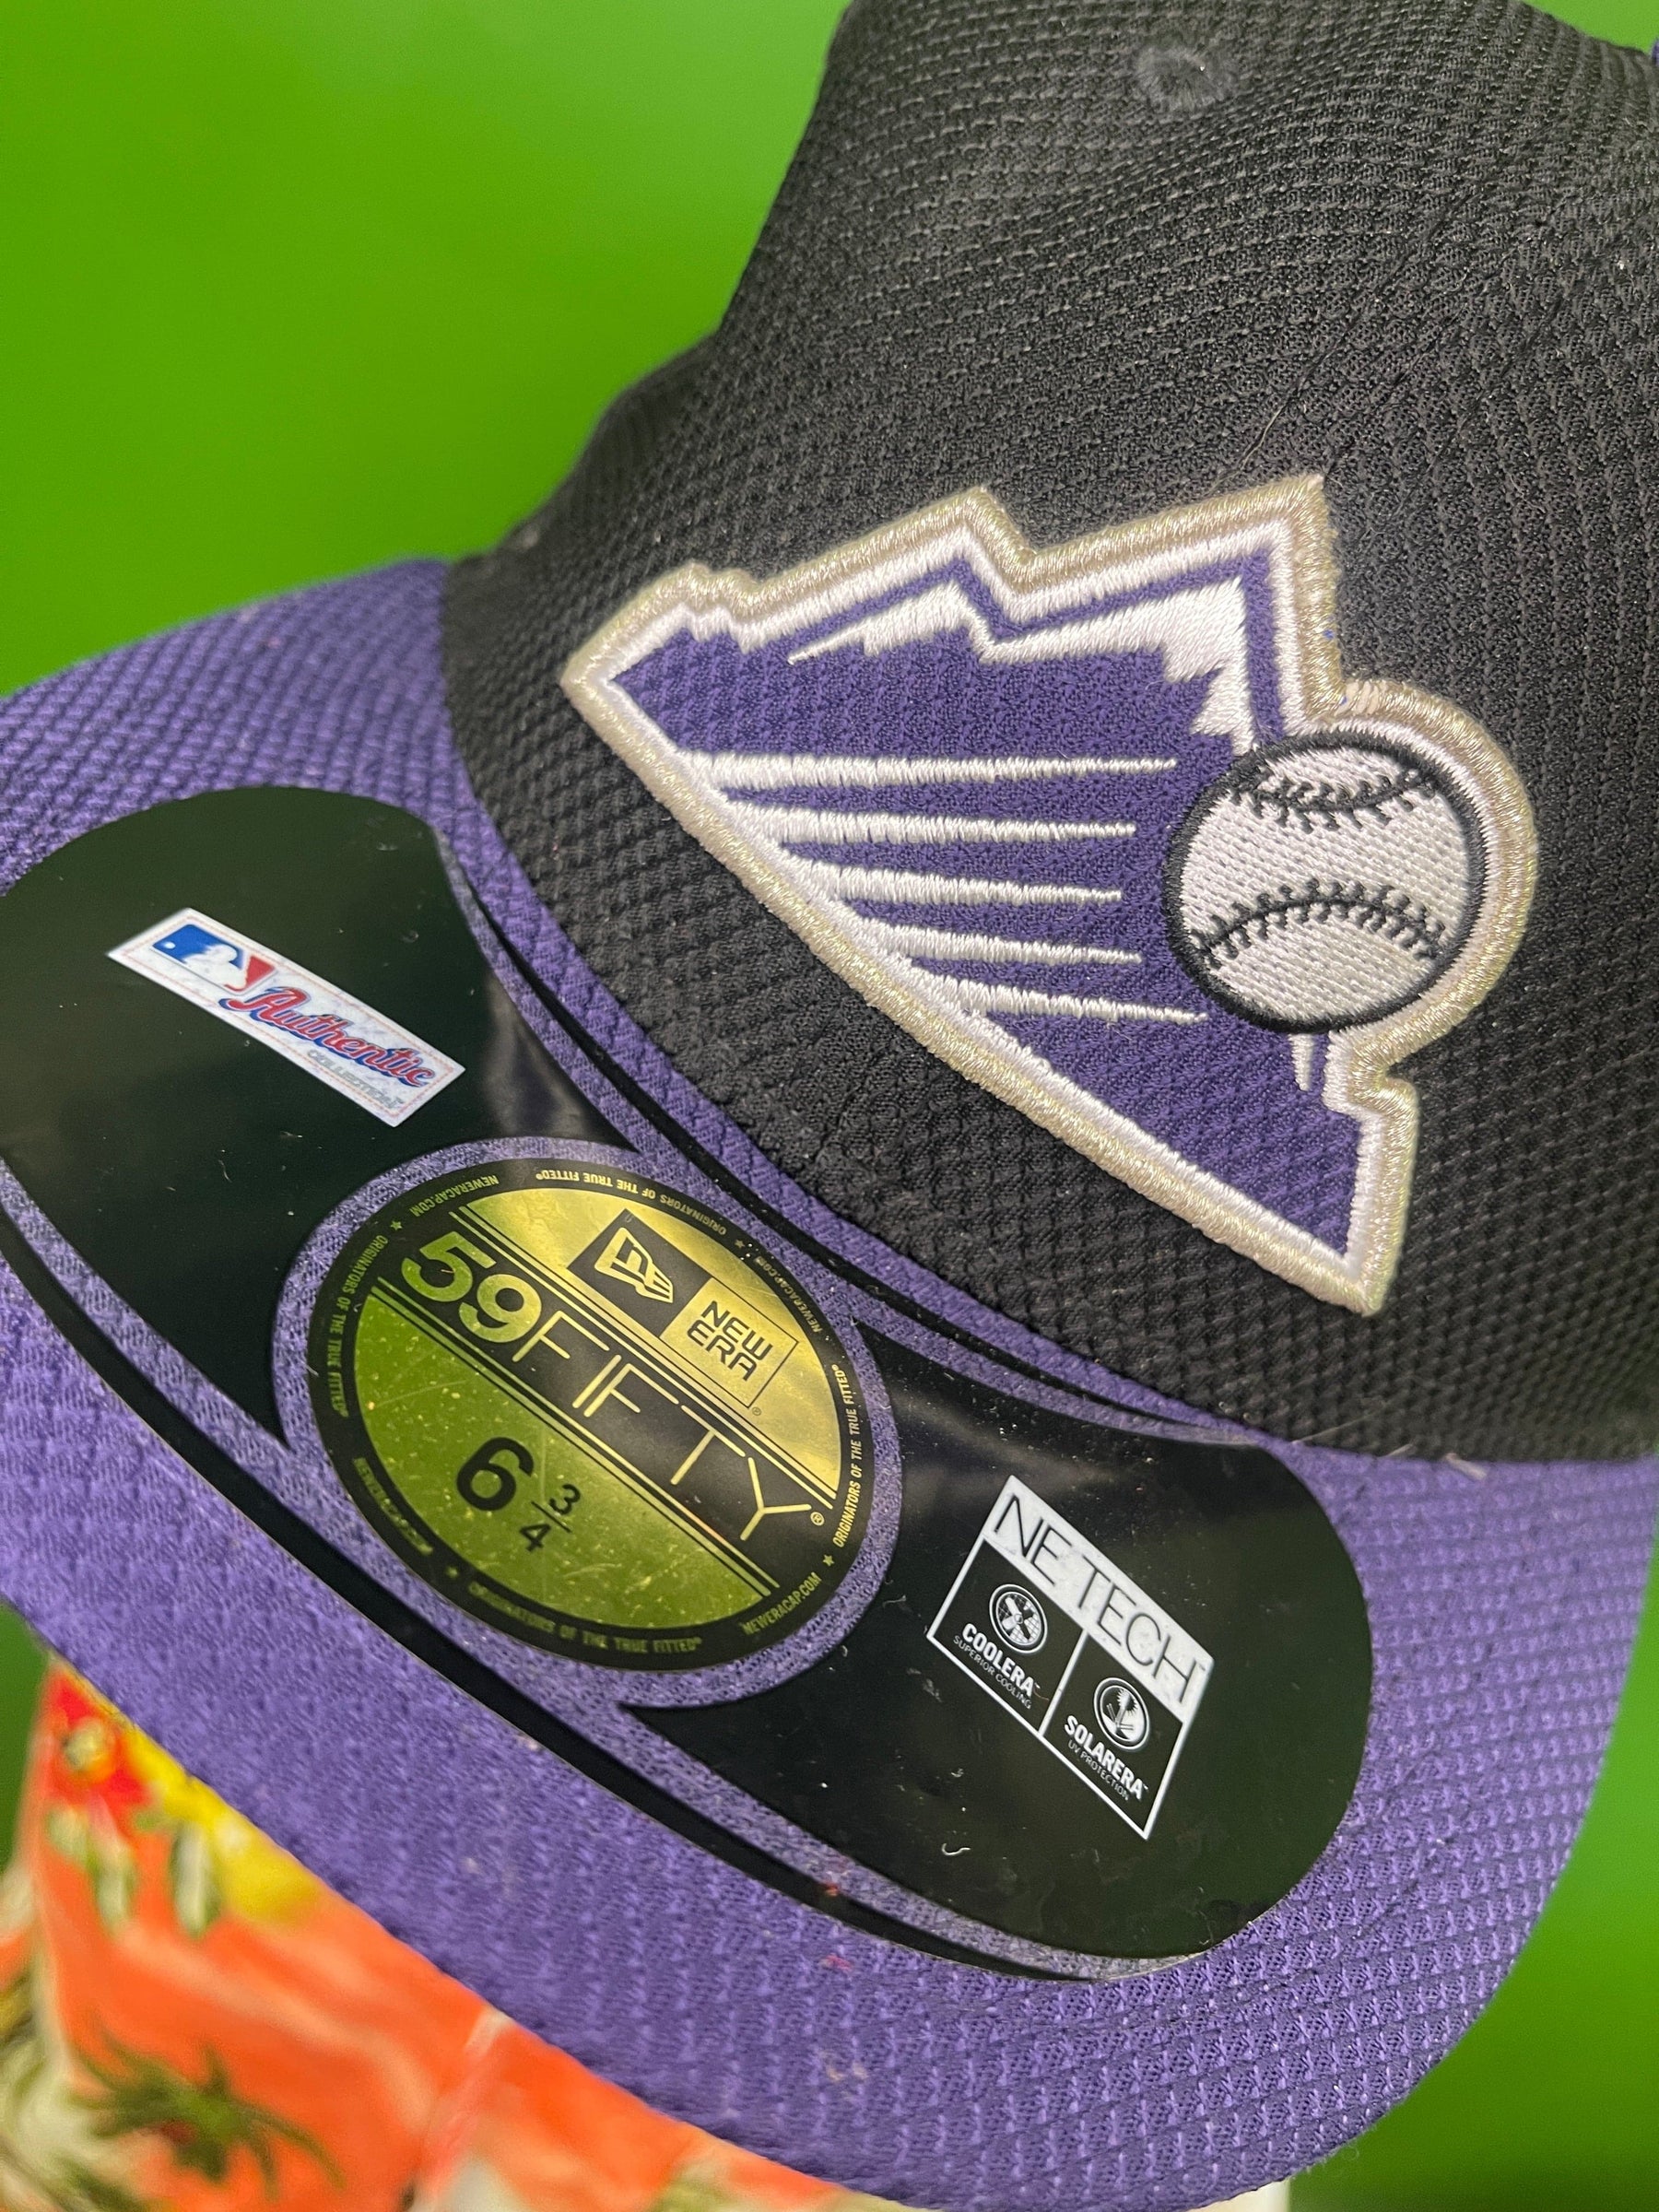 Colorado Rockies New Era Authentic Collection ON Field 59FIFTY Structured  Hat - Purple